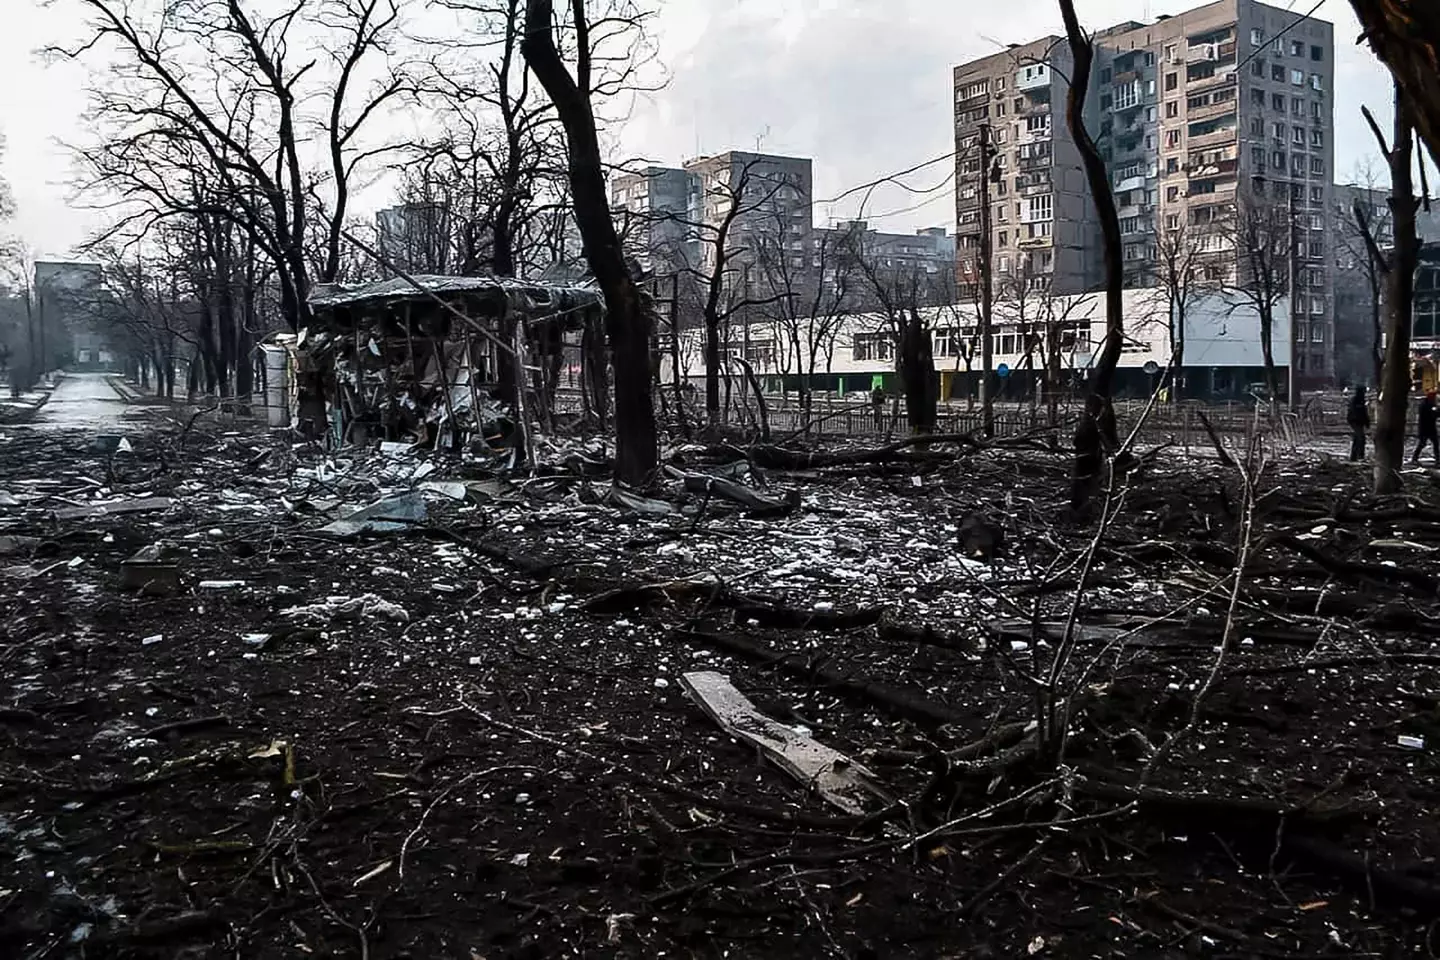 More than 2,00 people have been killed in Mariupol. (Alamy)